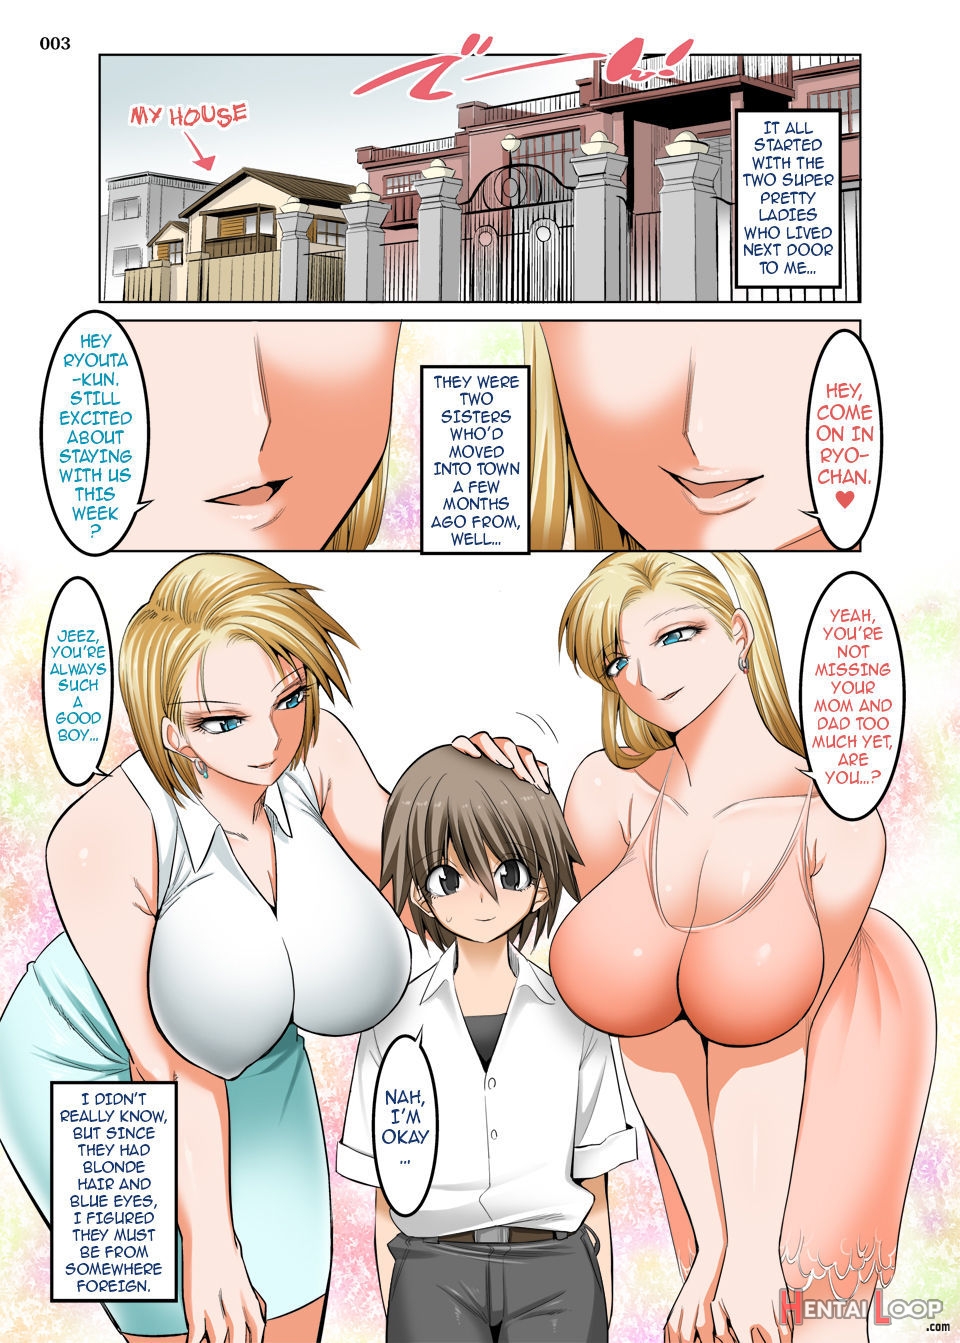 The Foreign Succubus Sisters Next Door page 2